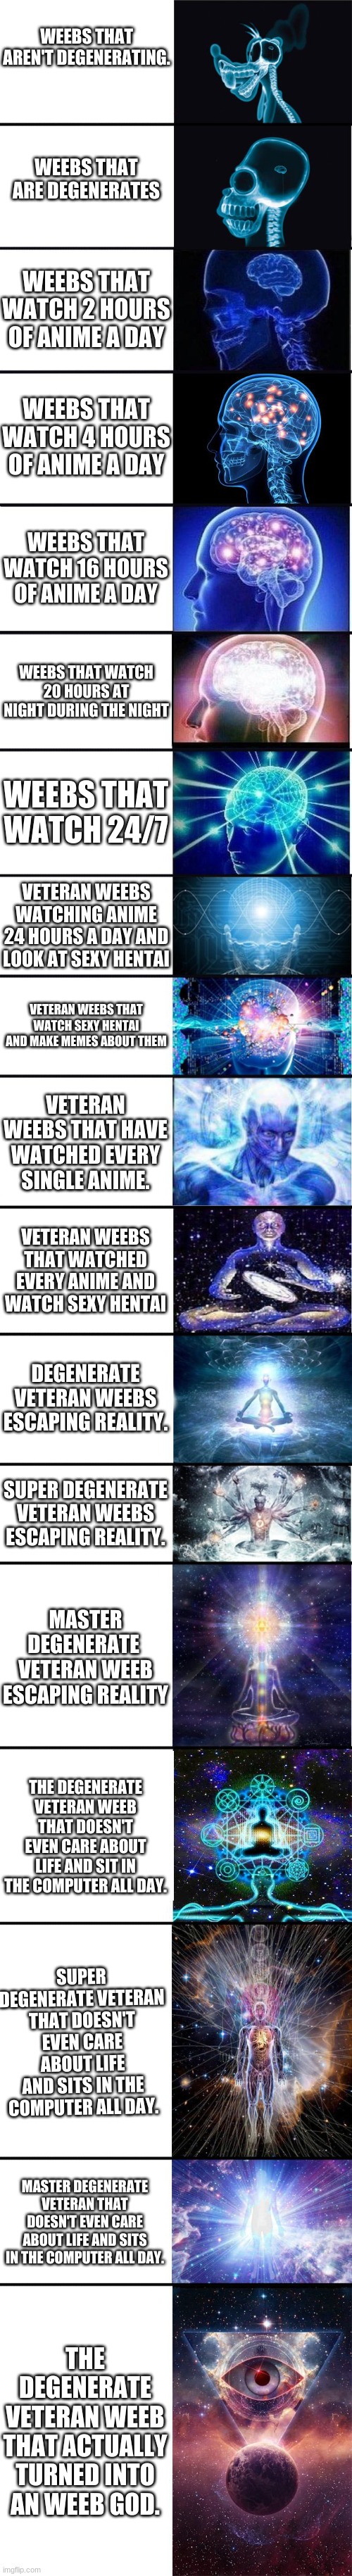 Expanding weeb brain go brrrrrrrrrrr | WEEBS THAT AREN'T DEGENERATING. WEEBS THAT ARE DEGENERATES; WEEBS THAT WATCH 2 HOURS OF ANIME A DAY; WEEBS THAT WATCH 4 HOURS OF ANIME A DAY; WEEBS THAT WATCH 16 HOURS OF ANIME A DAY; WEEBS THAT WATCH 20 HOURS AT NIGHT DURING THE NIGHT; WEEBS THAT WATCH 24/7; VETERAN WEEBS WATCHING ANIME 24 HOURS A DAY AND LOOK AT SEXY HENTAI; VETERAN WEEBS THAT WATCH SEXY HENTAI AND MAKE MEMES ABOUT THEM; VETERAN WEEBS THAT HAVE WATCHED EVERY SINGLE ANIME. VETERAN WEEBS THAT WATCHED EVERY ANIME AND WATCH SEXY HENTAI; DEGENERATE VETERAN WEEBS ESCAPING REALITY. SUPER DEGENERATE VETERAN WEEBS ESCAPING REALITY. MASTER DEGENERATE  VETERAN WEEB ESCAPING REALITY; THE DEGENERATE VETERAN WEEB THAT DOESN'T EVEN CARE ABOUT LIFE AND SIT IN THE COMPUTER ALL DAY. SUPER DEGENERATE VETERAN THAT DOESN'T EVEN CARE ABOUT LIFE AND SITS IN THE COMPUTER ALL DAY. MASTER DEGENERATE VETERAN THAT DOESN'T EVEN CARE ABOUT LIFE AND SITS IN THE COMPUTER ALL DAY. THE DEGENERATE VETERAN WEEB THAT ACTUALLY TURNED INTO A WEEB GOD. | image tagged in expanding brain 9001,weebs,weeb,otaku | made w/ Imgflip meme maker